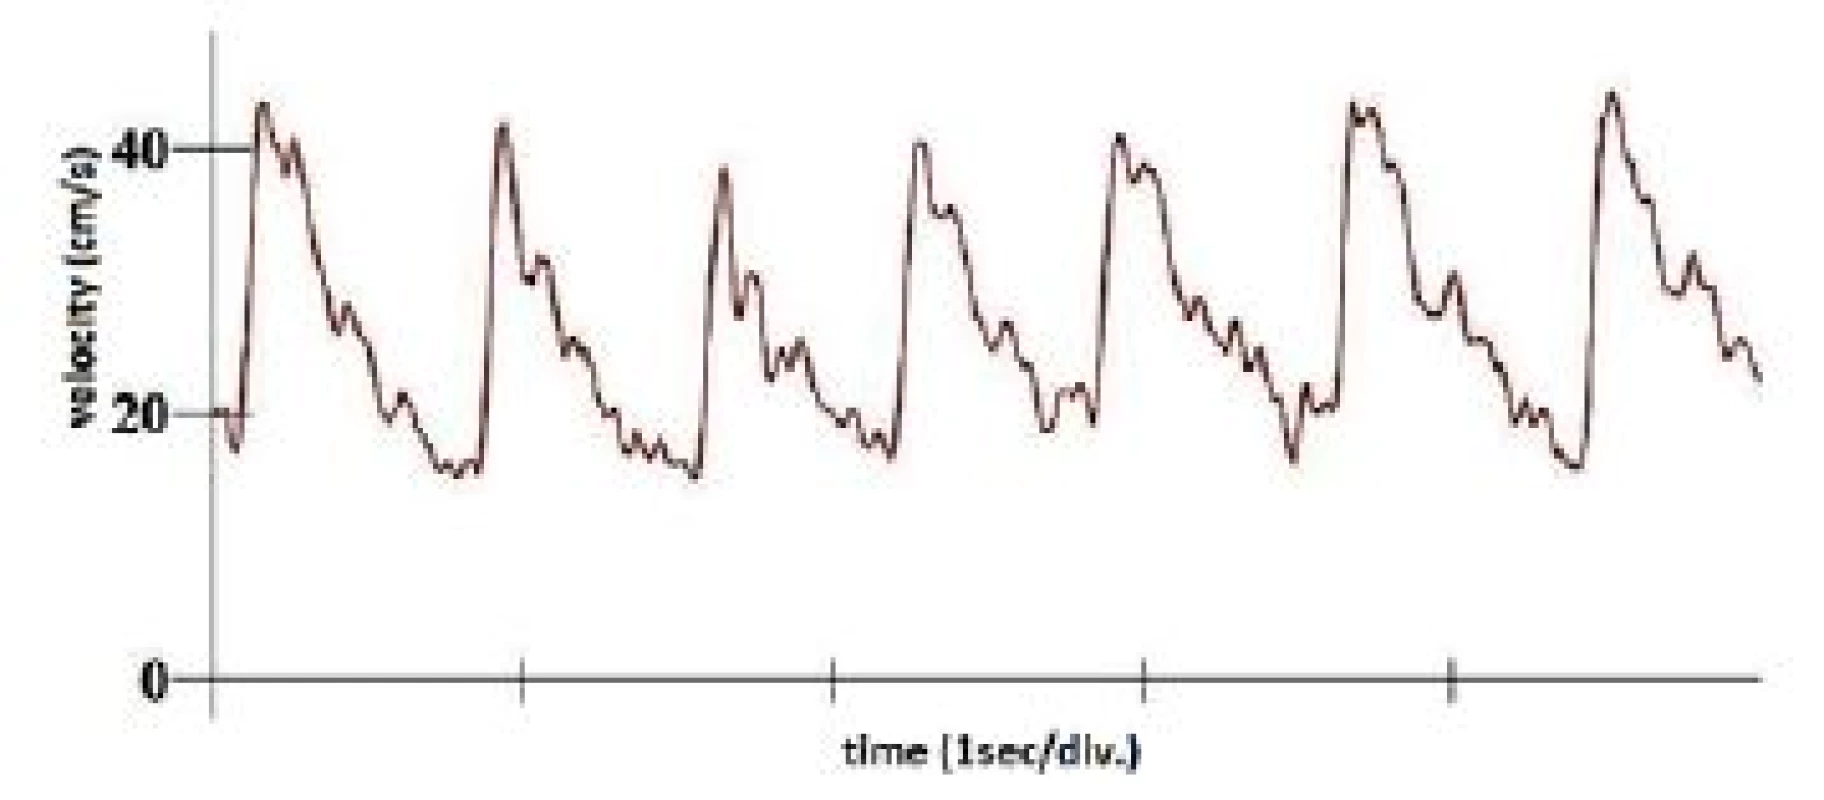 Typical appearance of after-exercise velocity waveforms.